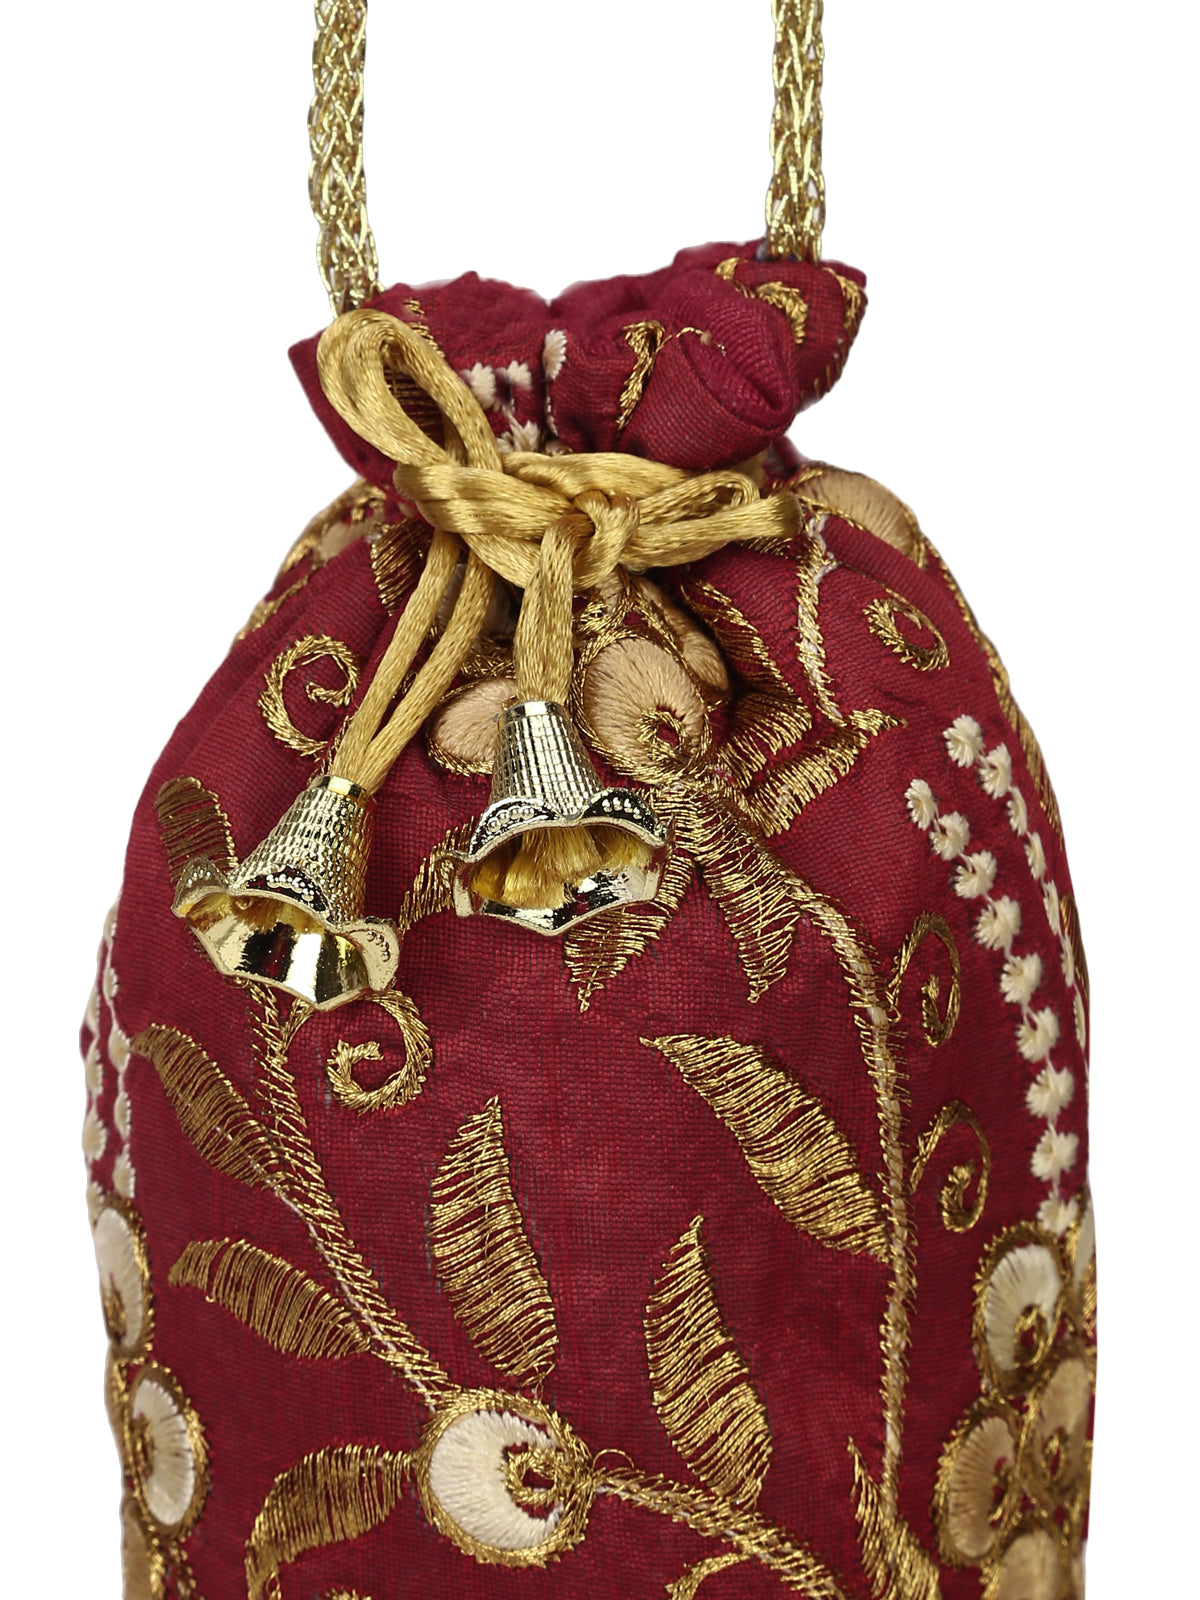 Embroidered Handcrafted Red Potli Bag